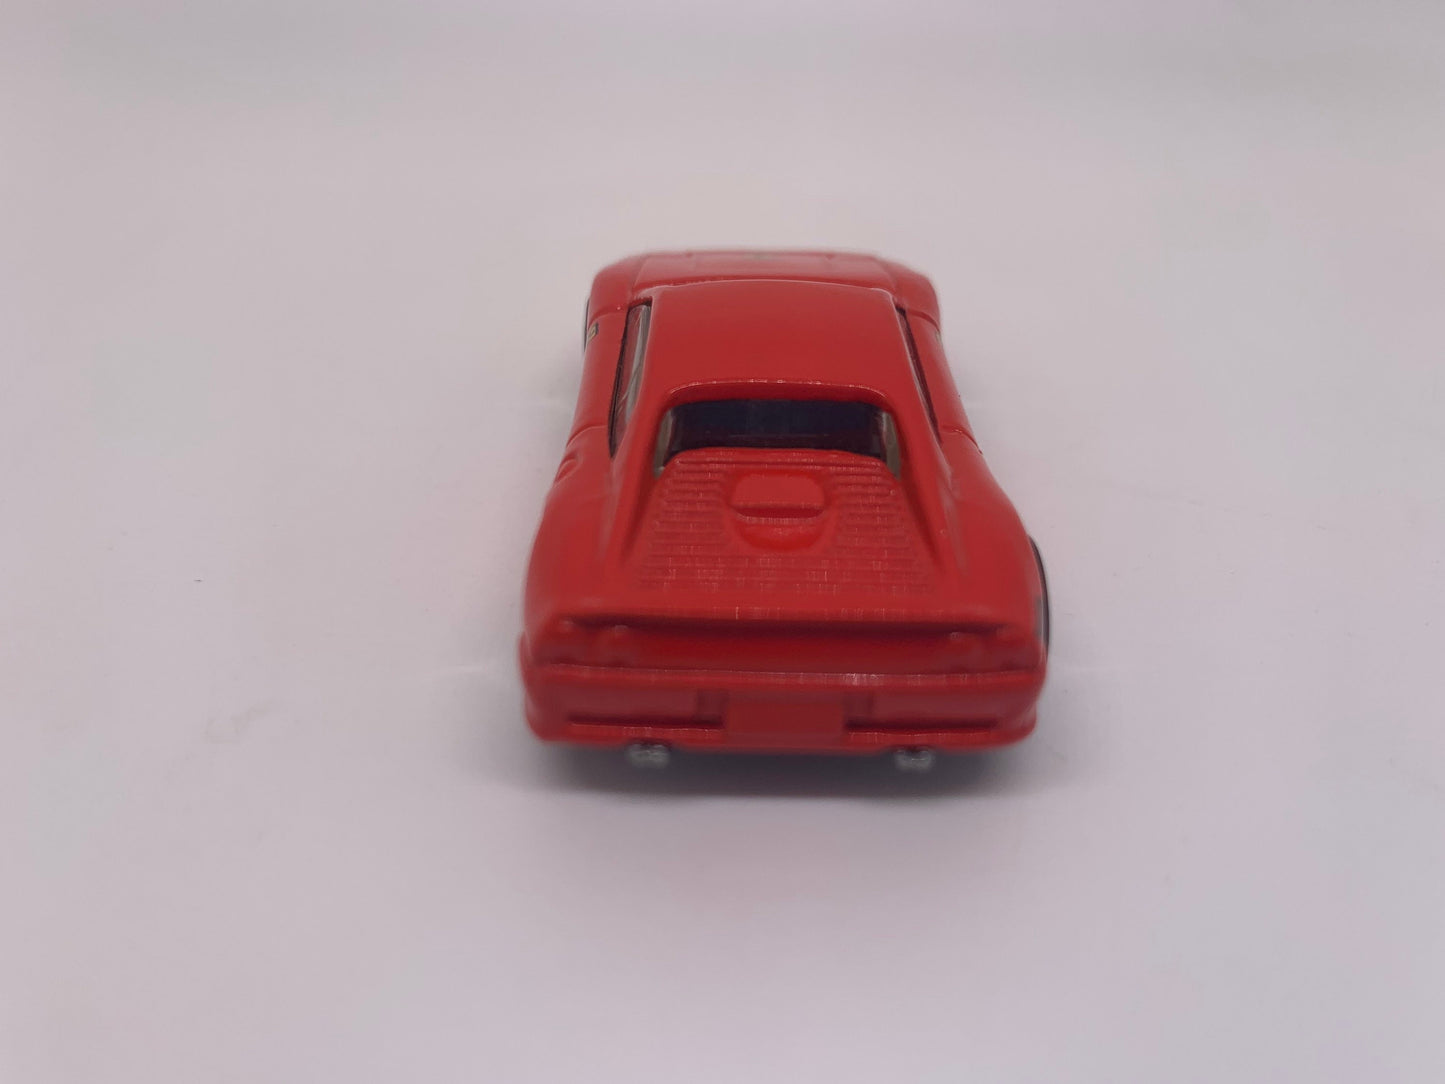 Hot Wheels Ferrari F355 Red Mainline #172 Perfect Birthday Gift Miniature Collectable Model Toy Car